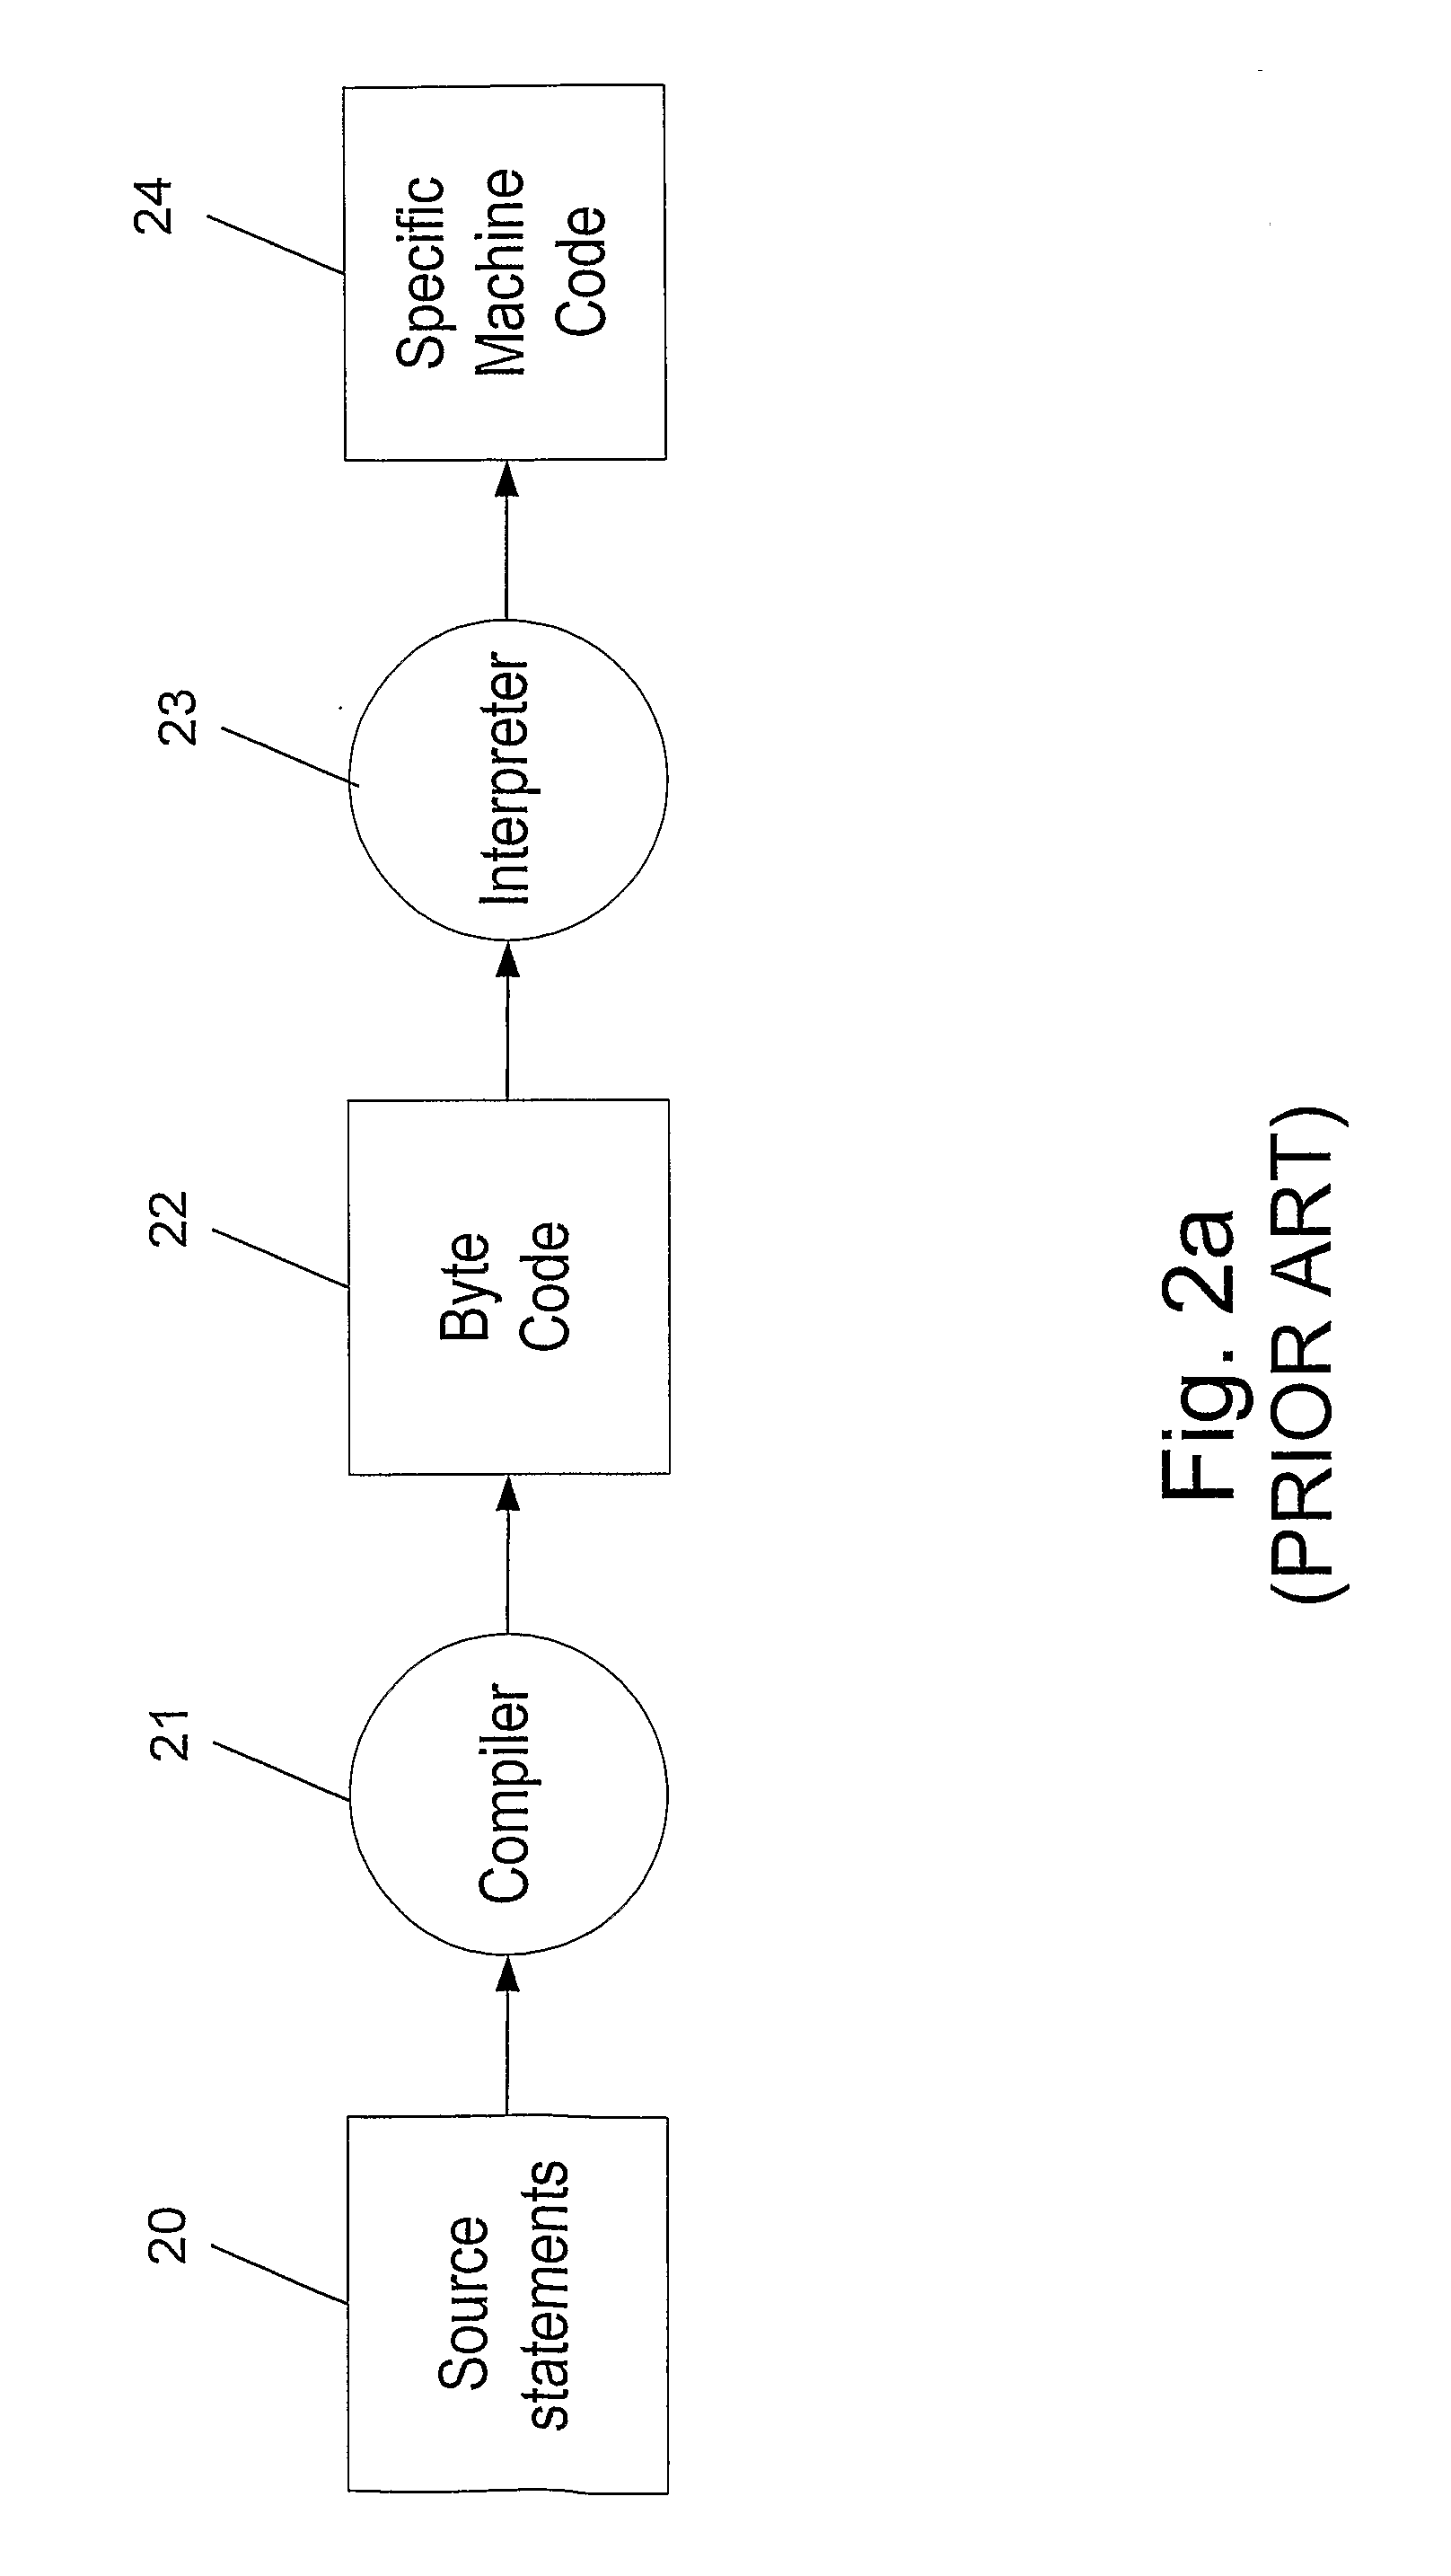 Method for Preventing Software Reverse Engineering, Unauthorized Modification, and Runtime Data Interception